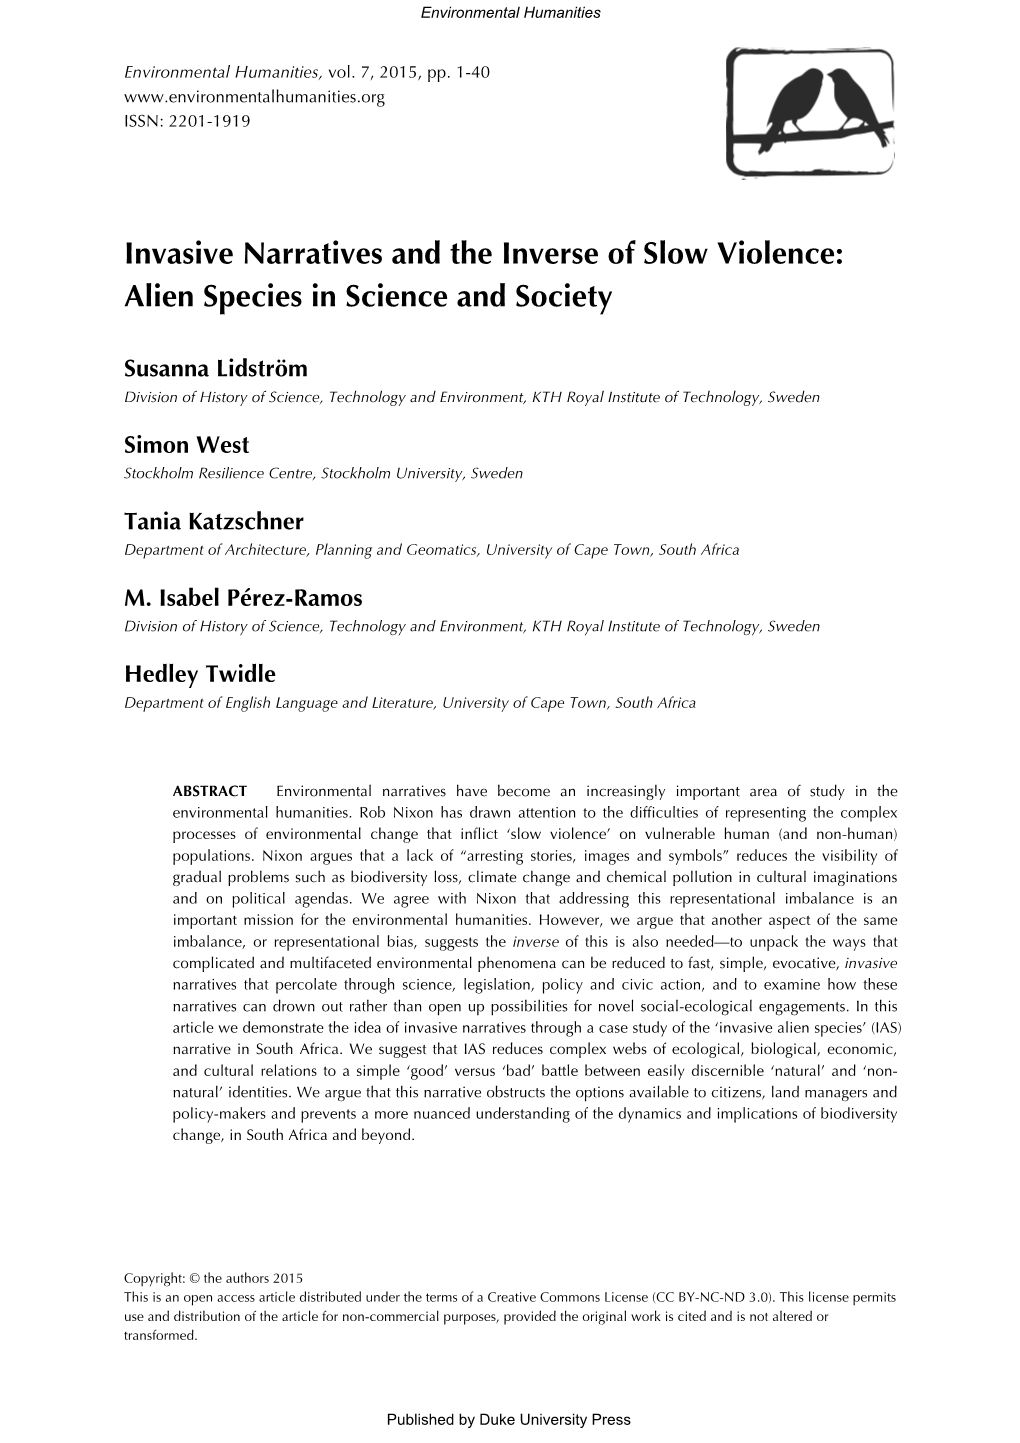 Invasive Narratives and the Inverse of Slow Violence: Alien Species in Science and Society